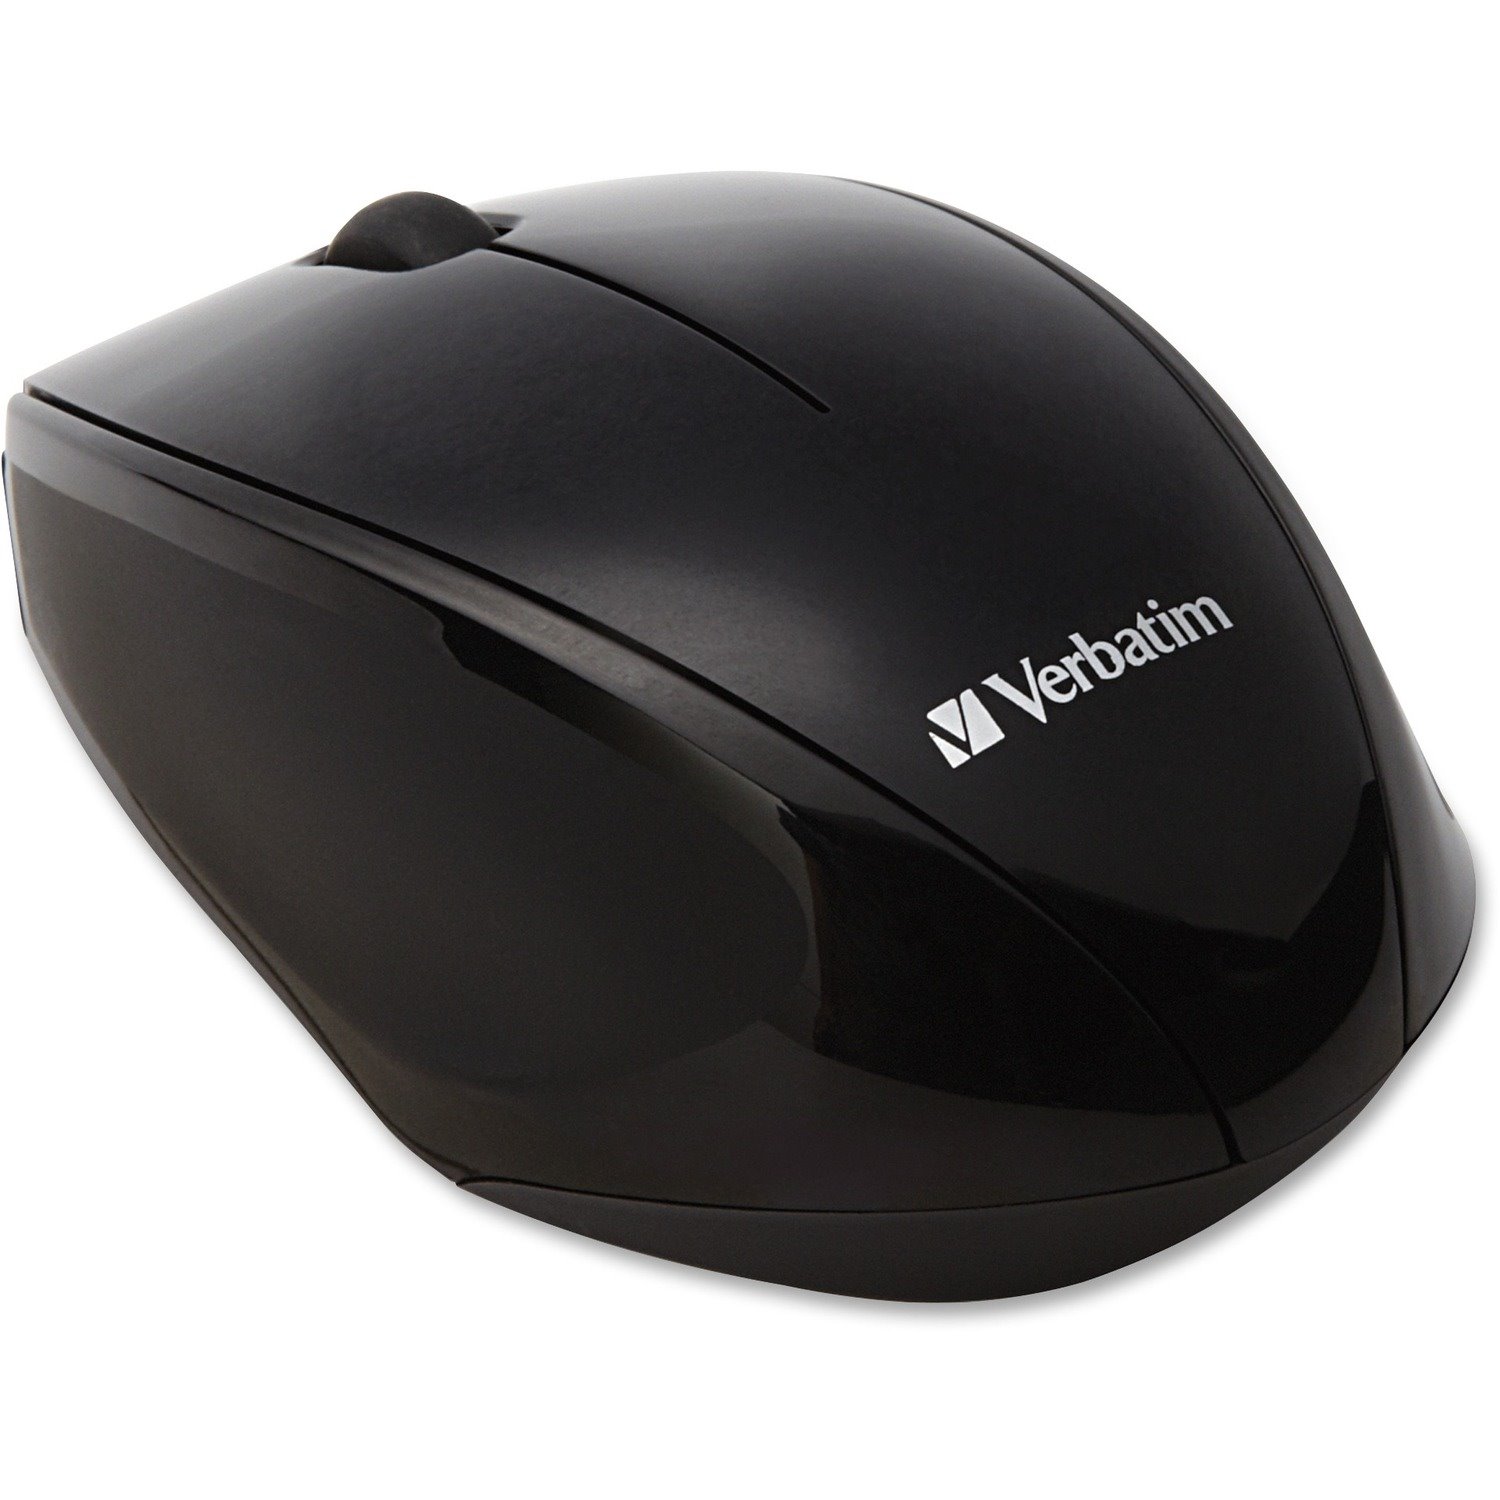 Verbatim Mouse - Radio Frequency - USB 2.0 - Blue Optical - 3 Button(s) - Black - 1 Pack